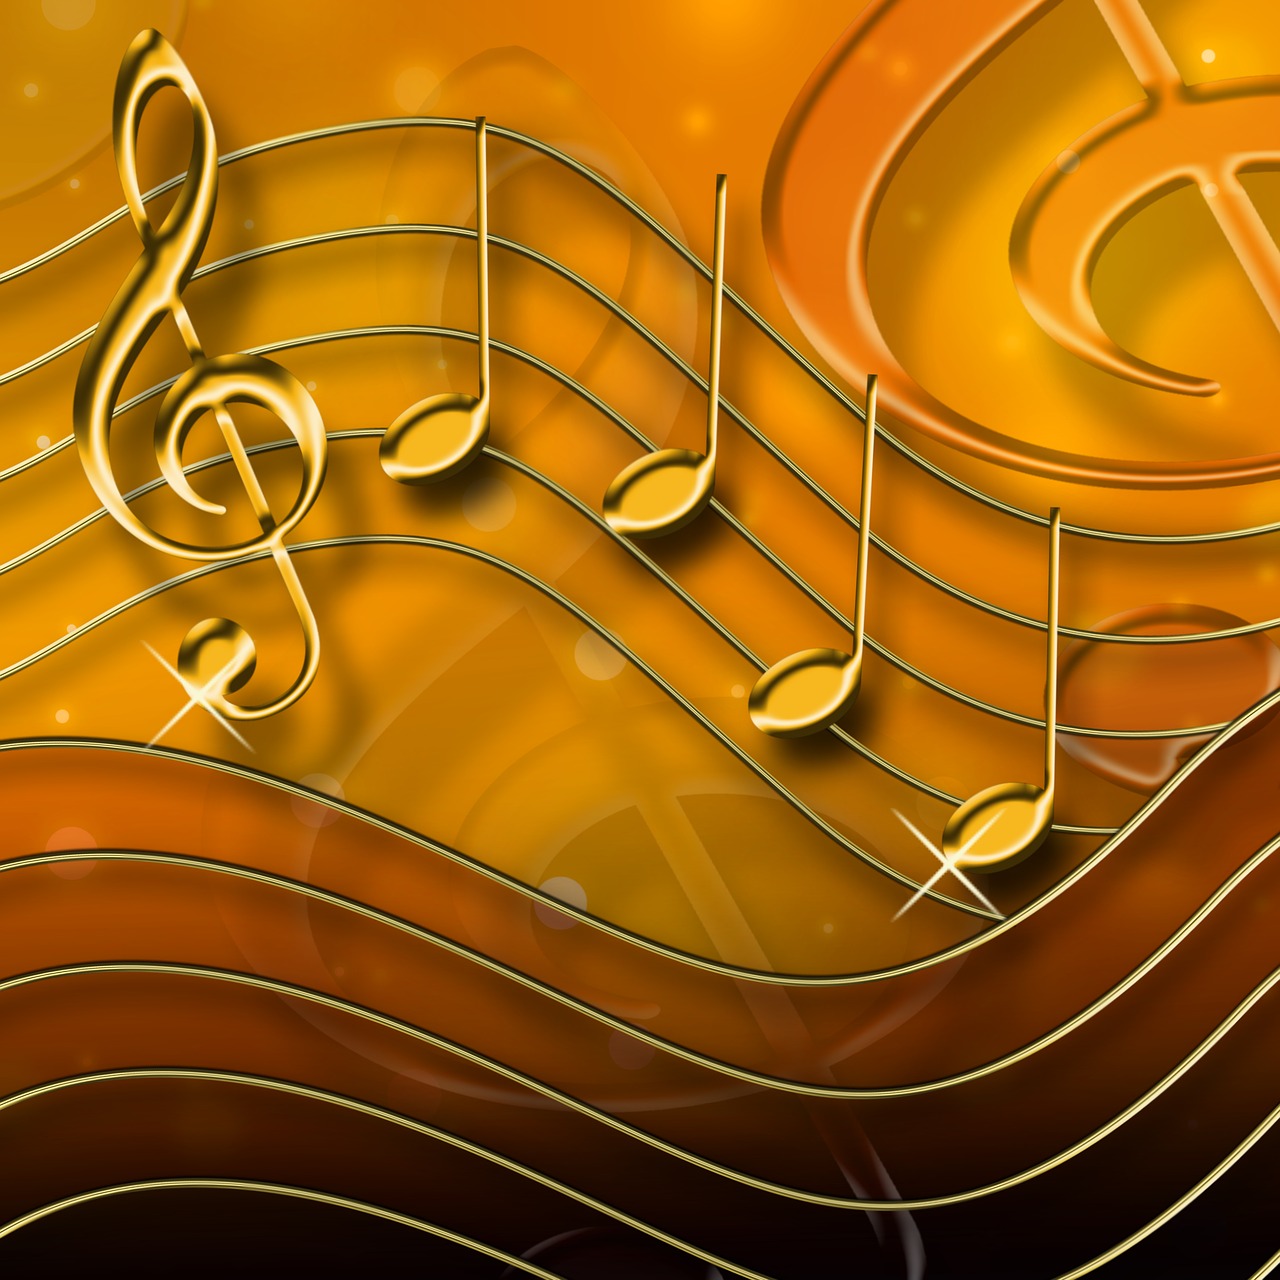 Download free photo of Music,clef,treble clef,staves,background - from  